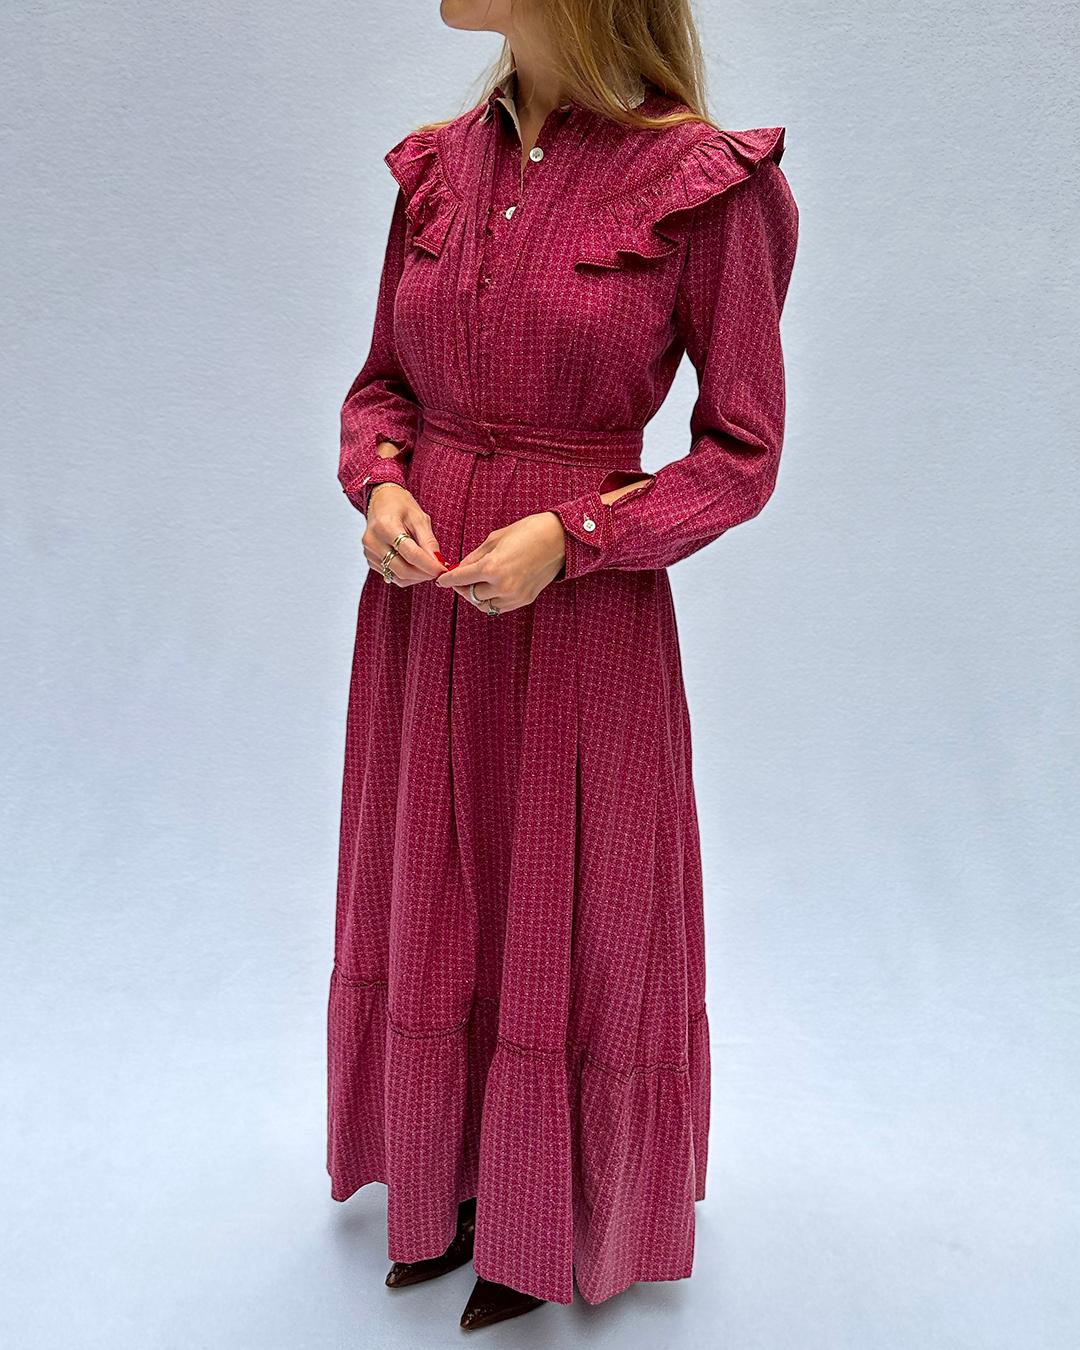 Antique Victorian Calico Dress In Fair Condition For Sale In New York, NY